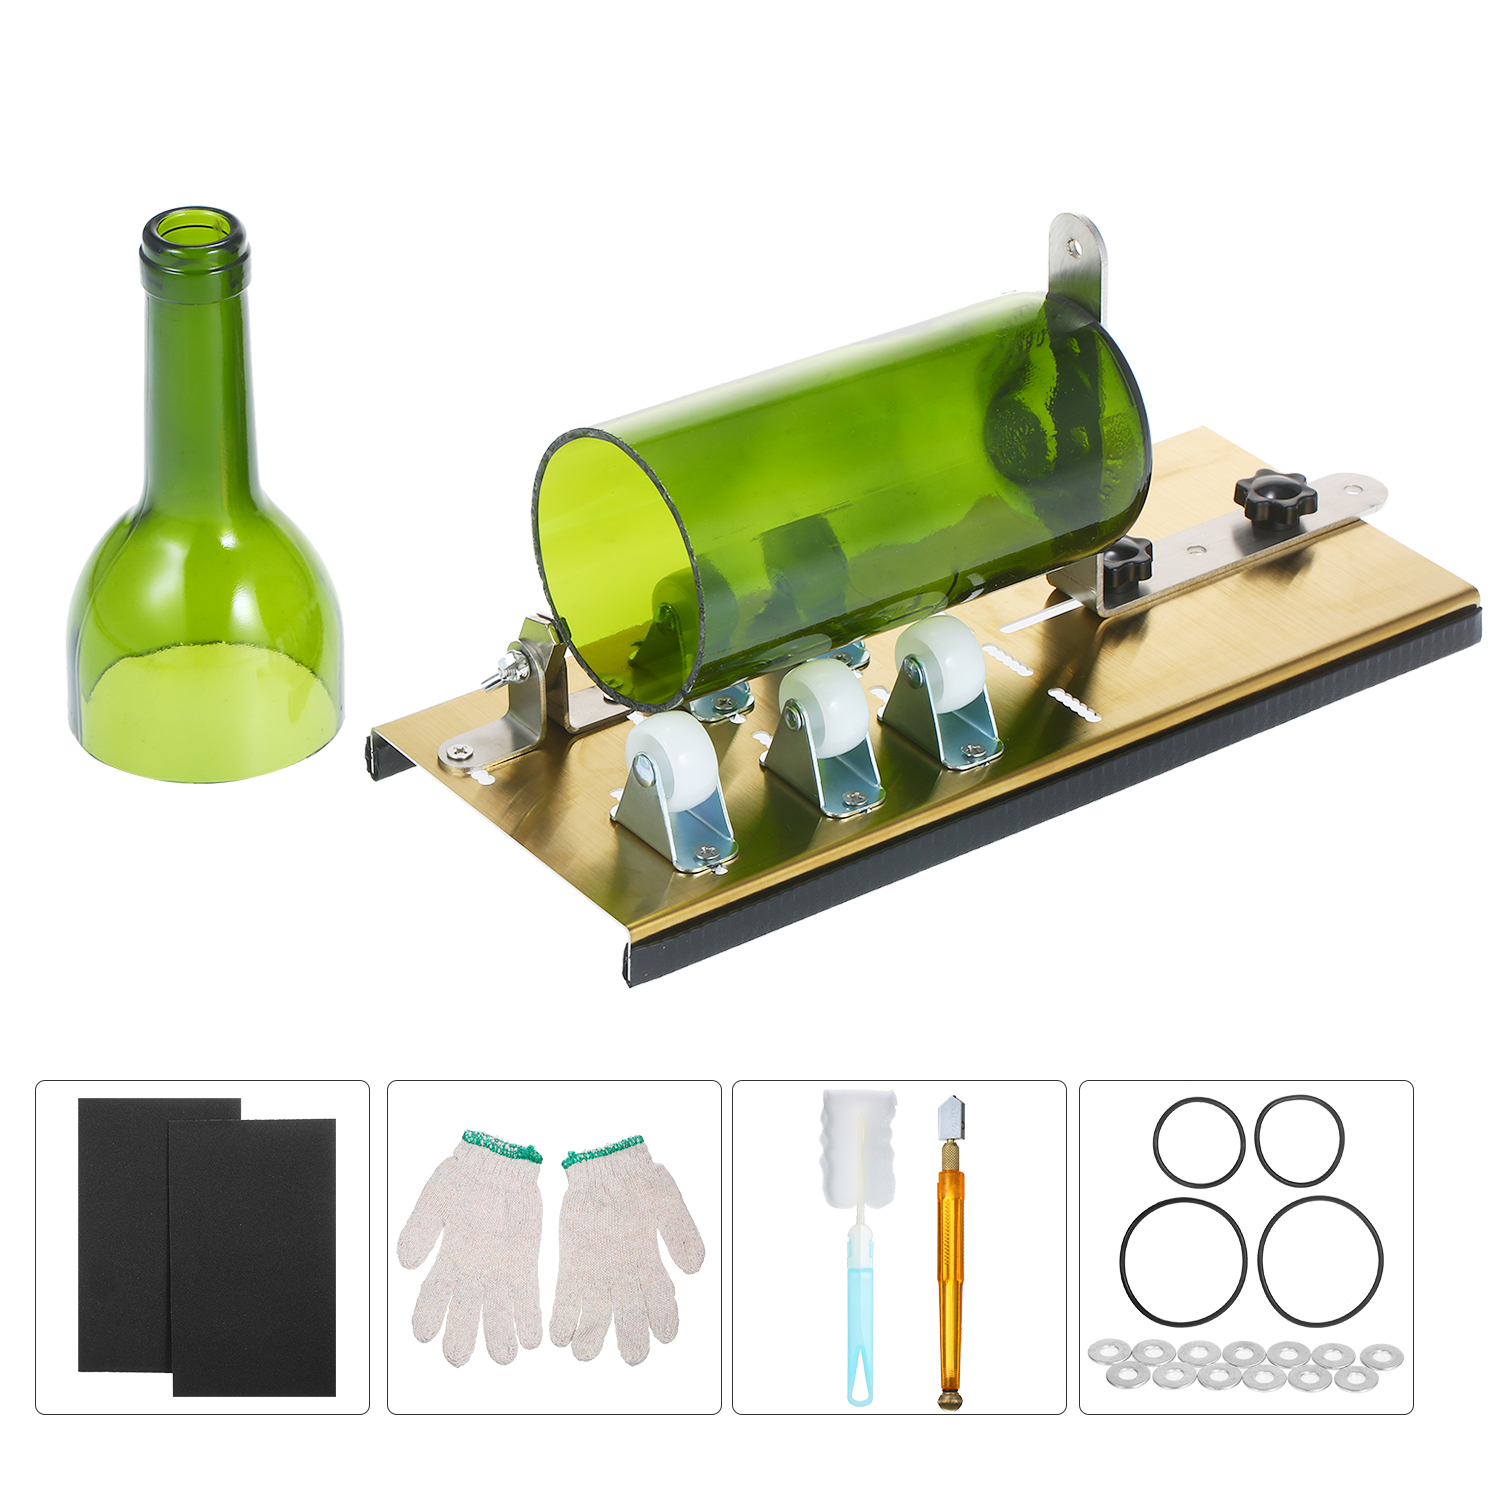 Htovila Glass Bottle Cutter Kit Bottle Cutter DIY Machine for Cutting Round Oval Bottles and Mason Jars with Gloves Sanding Paper Fixing Rubber Ring and Pencil Glass Cutter for Bottle DIY Art - image 1 of 7